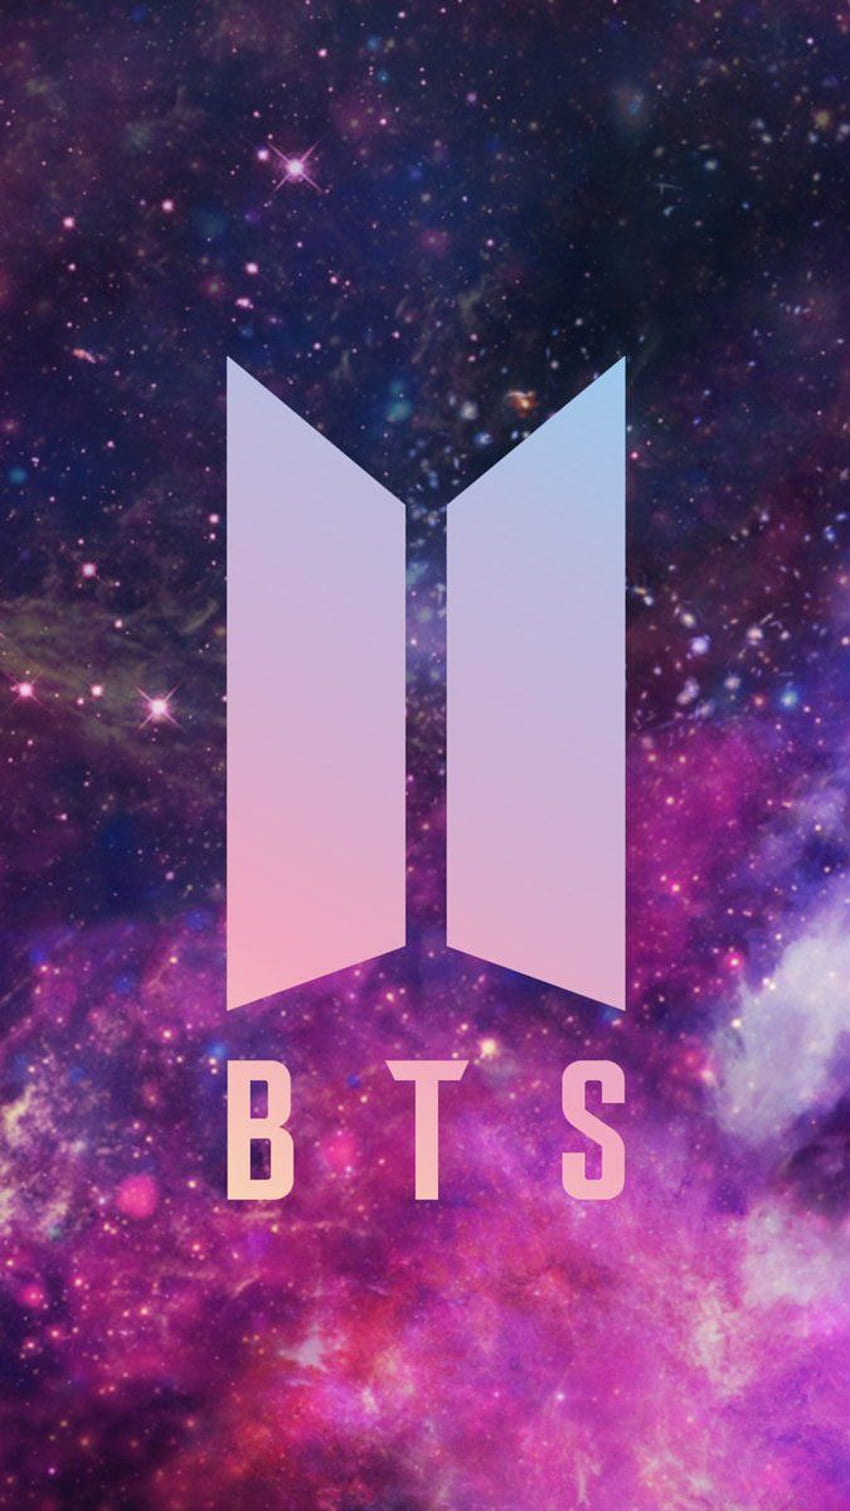 Bts Army Logo Posters for Sale | Redbubble